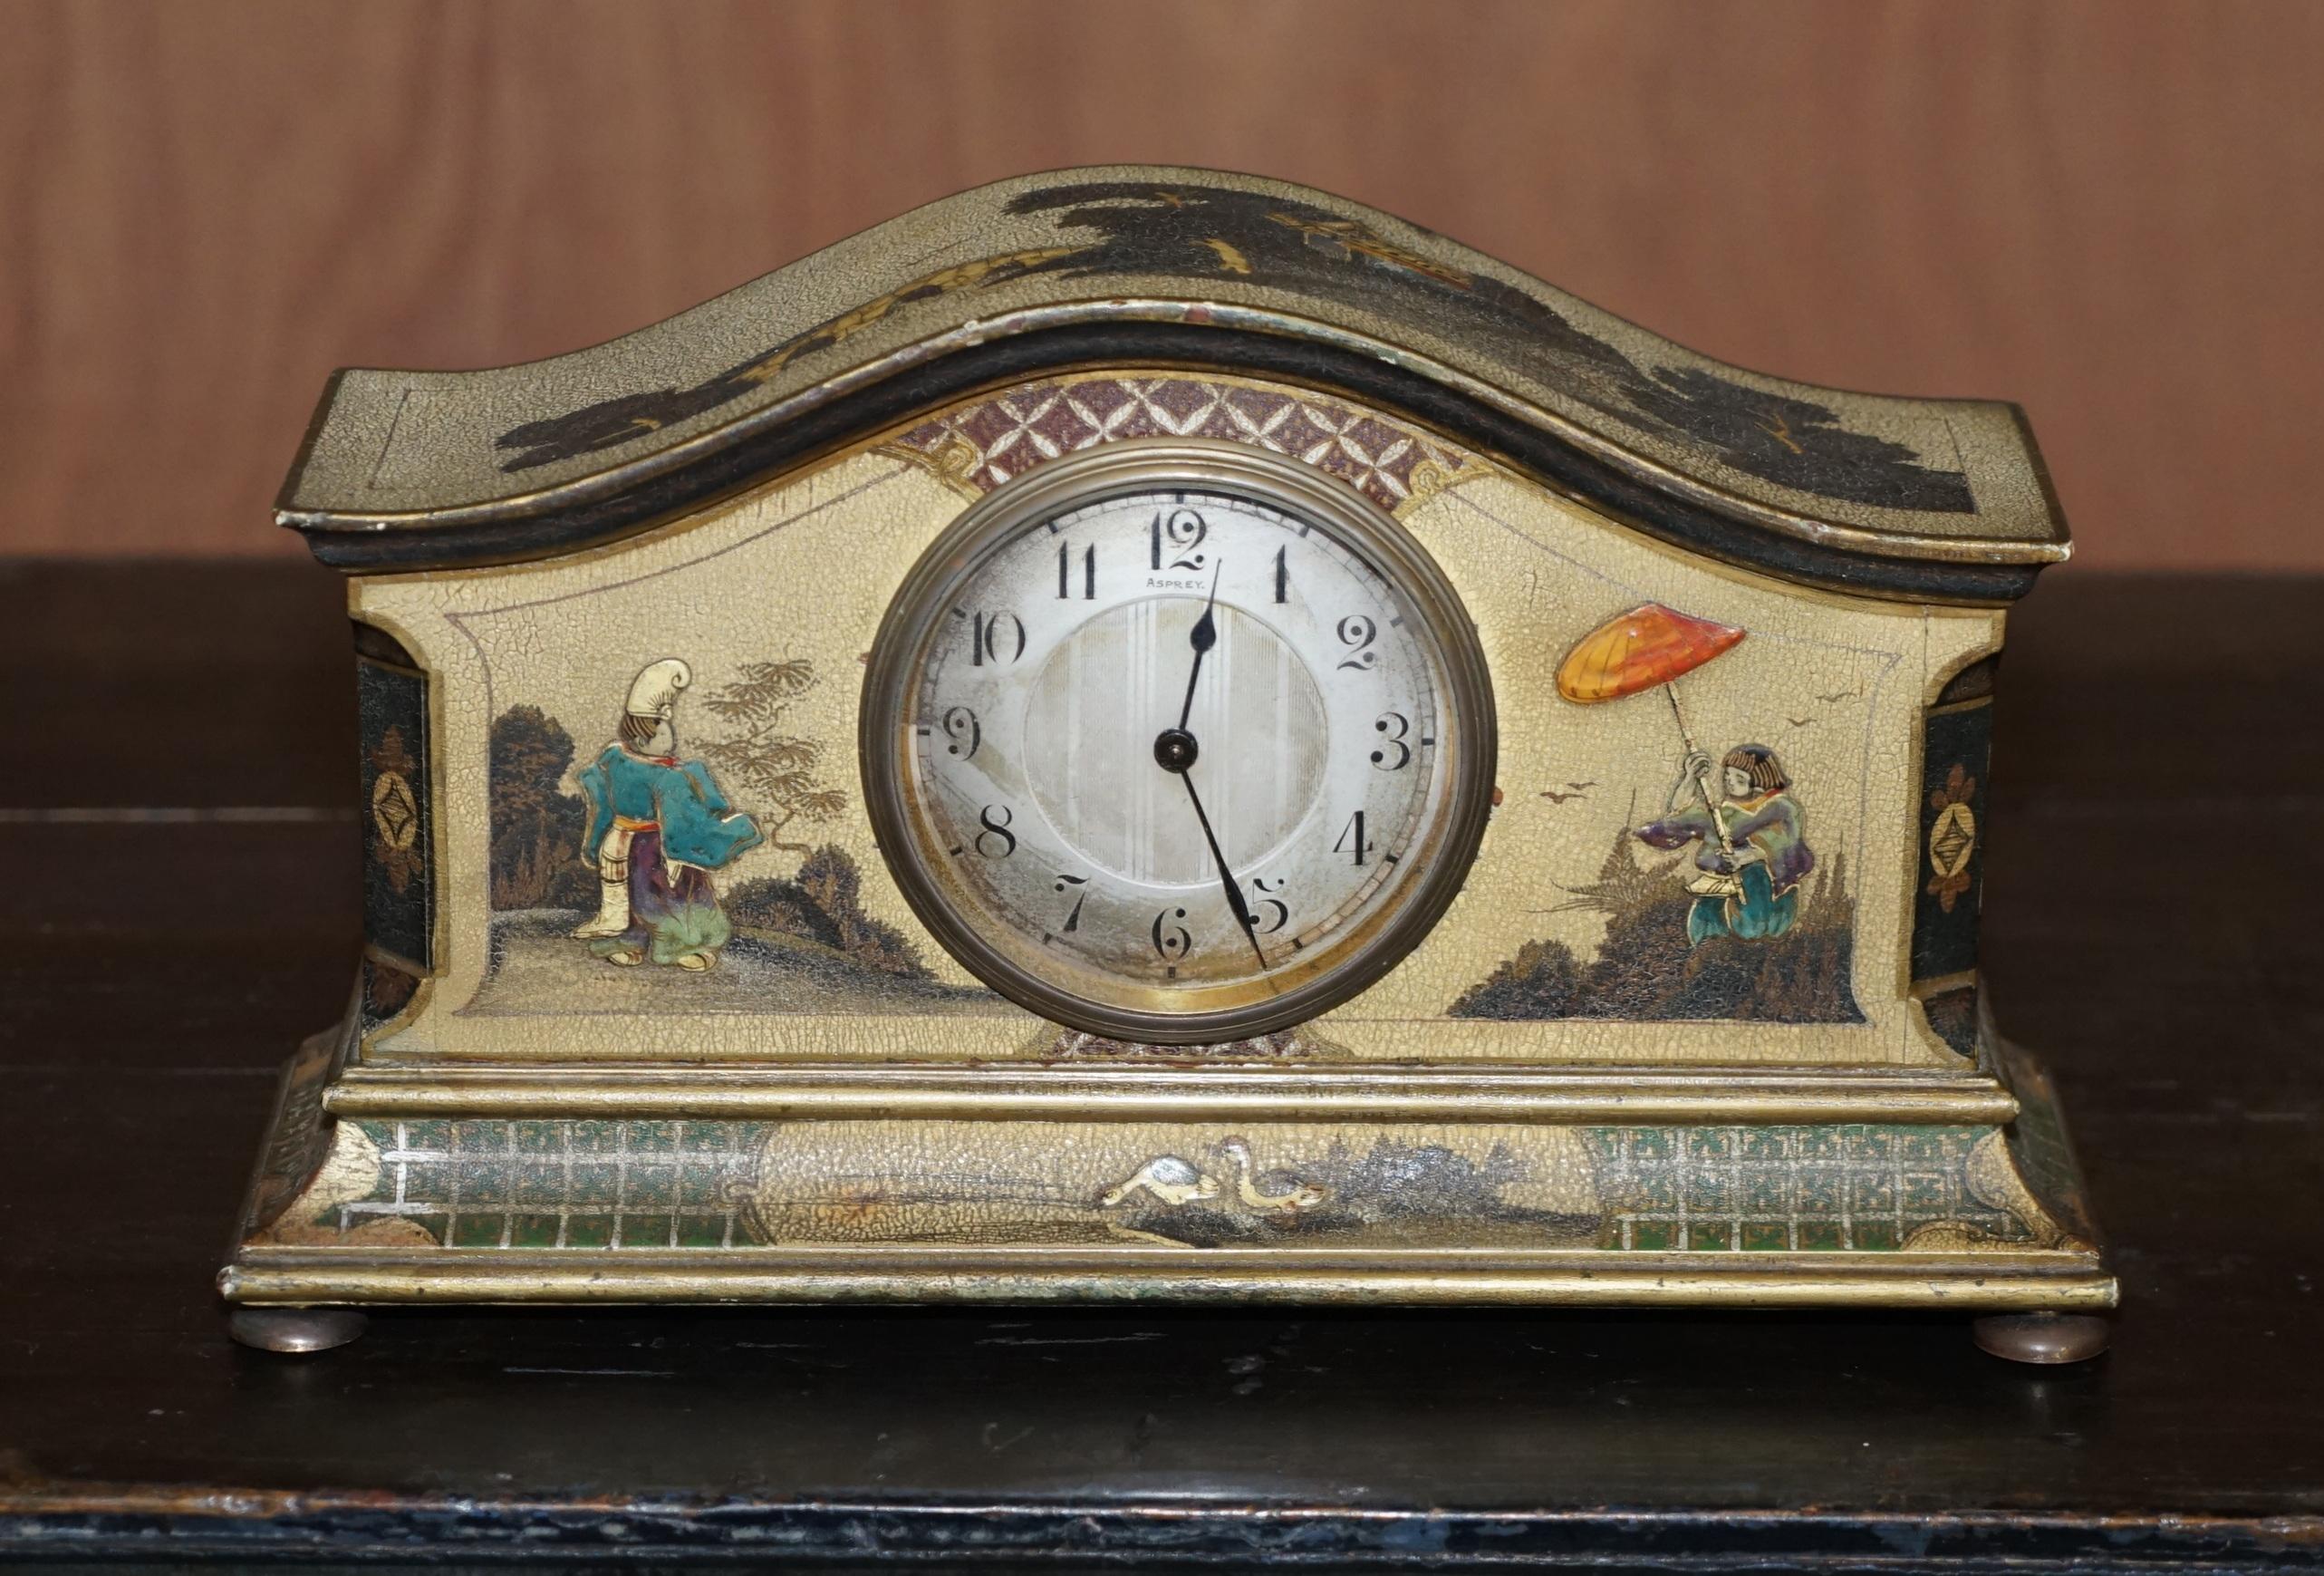 We are delighted to offer this lovely original circa 1920’s Asprey London Chinoiserie mantle clock

A very decorative and well made piece, retailed through one of the finest silversmiths England has ever produced, Asprey’s

The clock is a manual